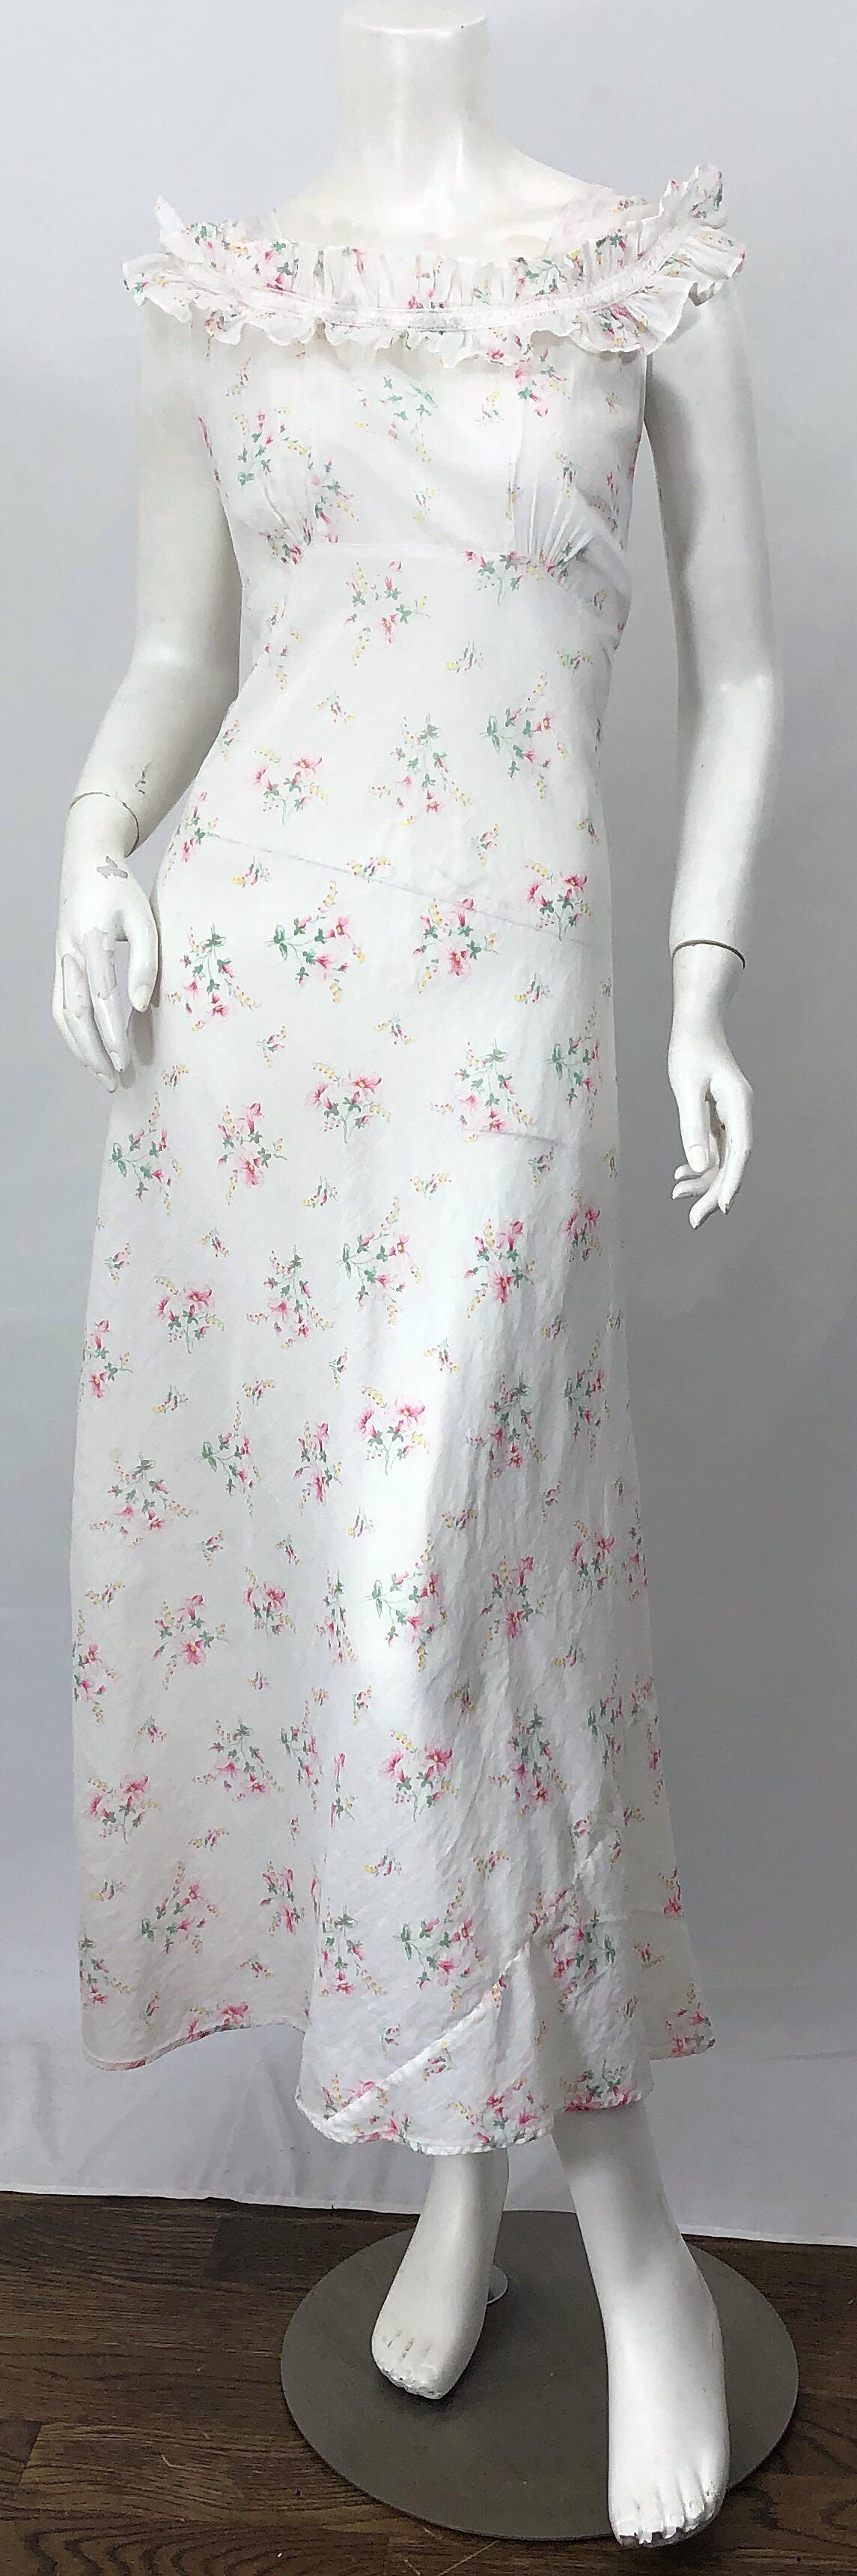 Beautiful 30s white flower print lightweight cotton voile bias cut sleeveless maxi dress! Features a stark white background with bouquets of flowers in vibrant colors of pink, yellow and green throughout/ Two layers of ruffles at the front neck add